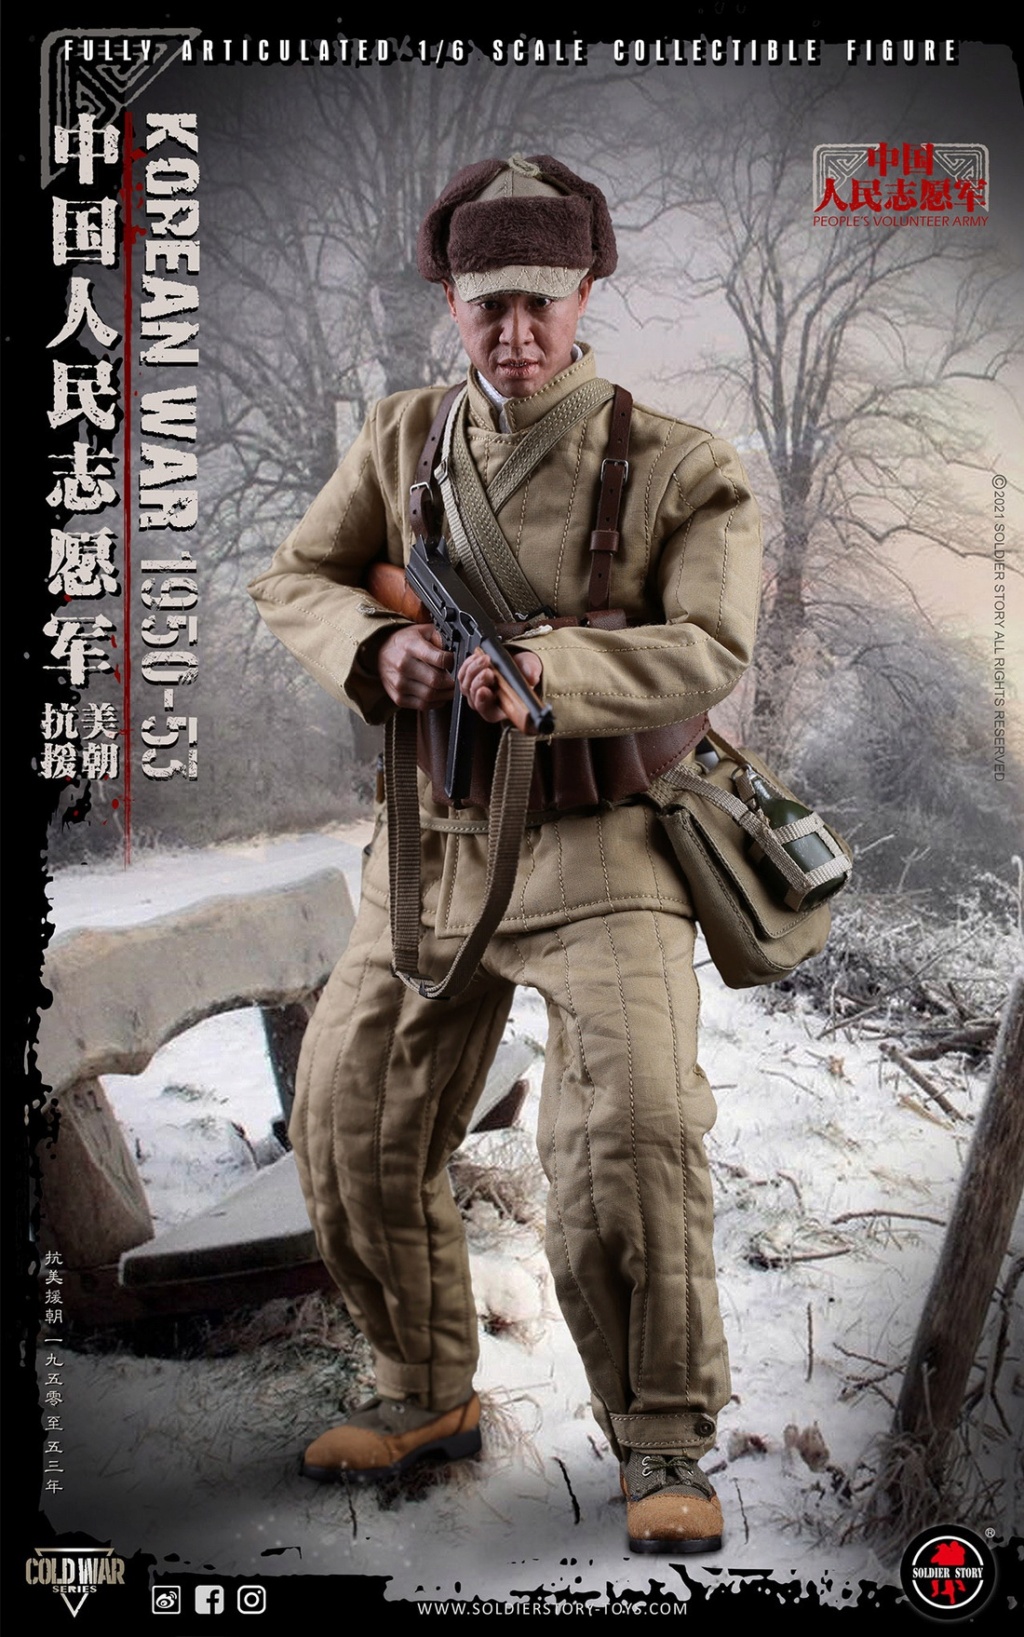 Soldierstory - NEW PRODUCT: SOLDIER STORY: 1/6 Chinese People’s Volunteers 1950-53 Collectible Action Figure (#SS-124) D375a810